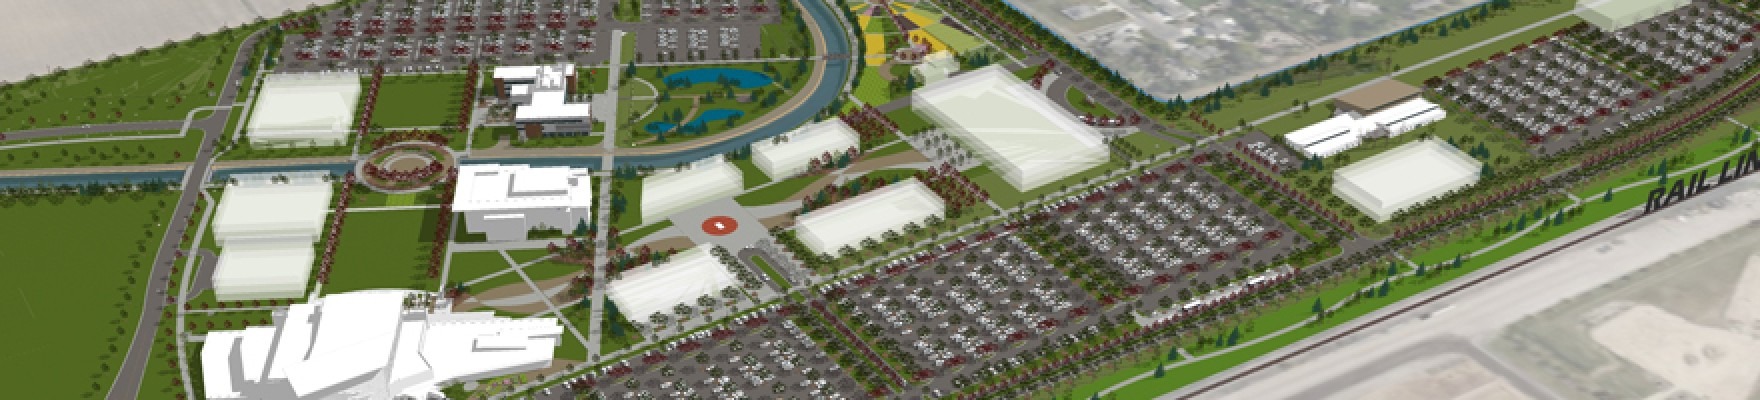 Rendering of aerial view of the CWI Nampa campus.